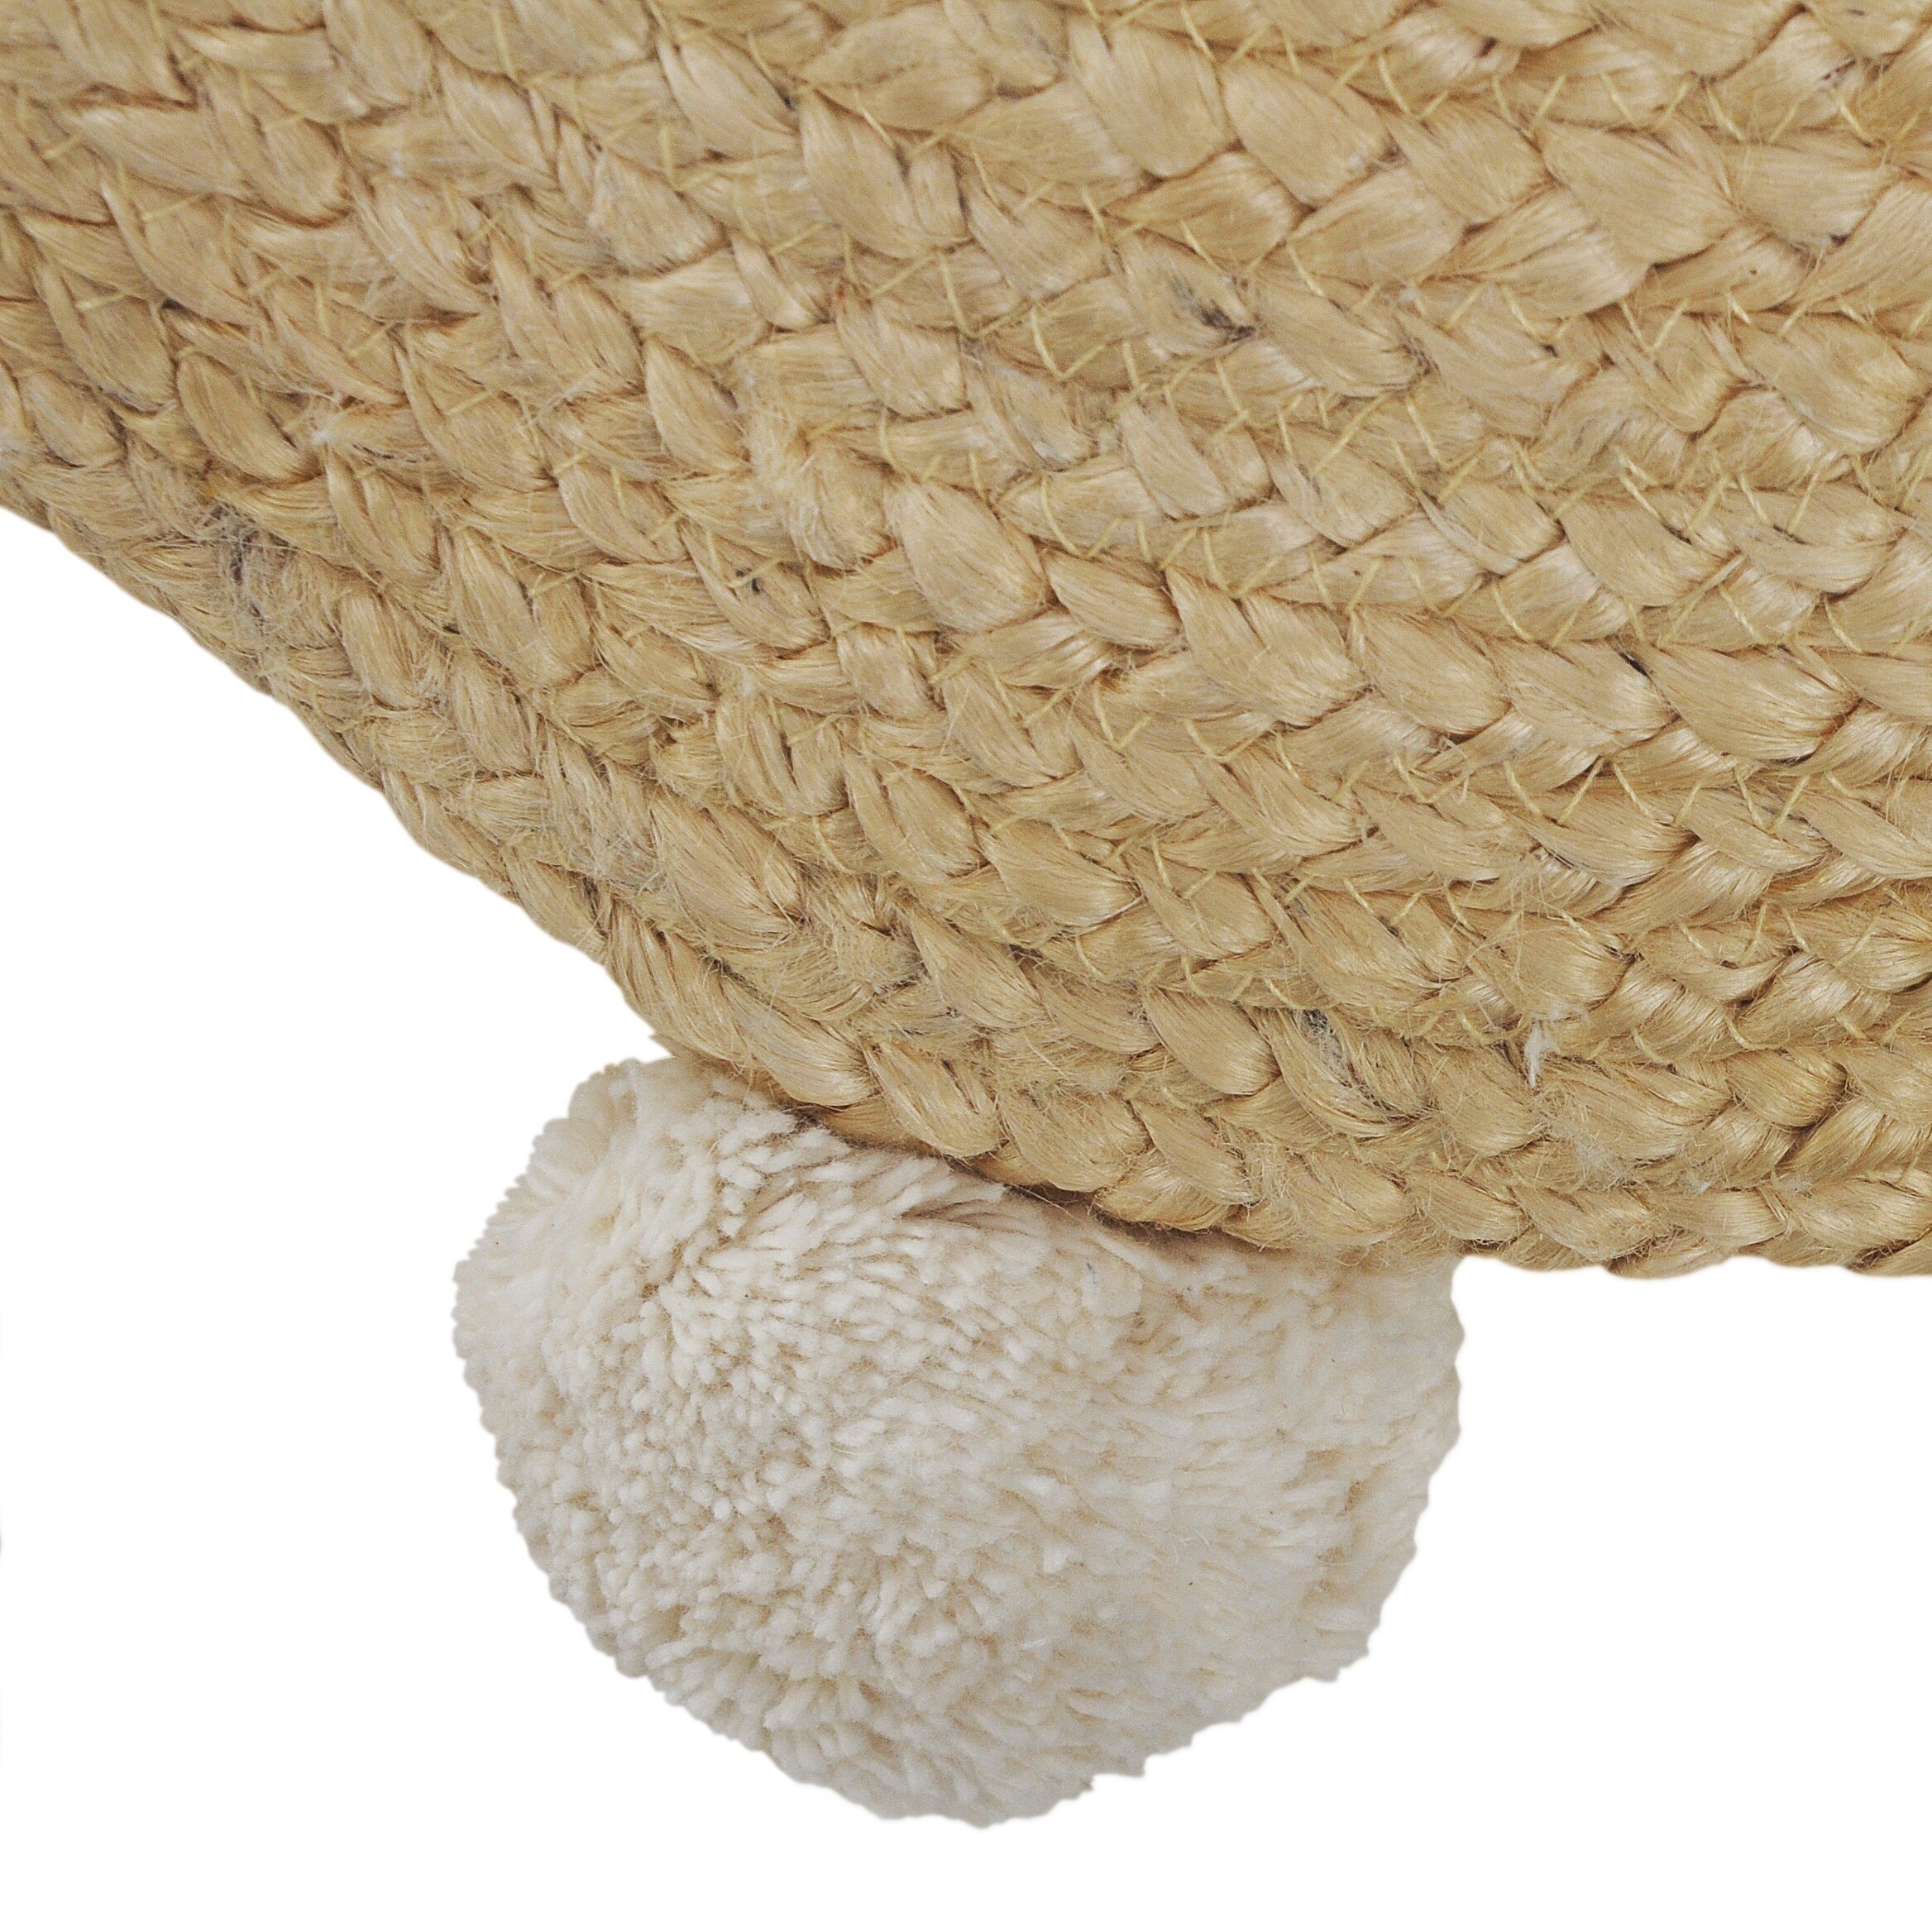 https://ak1.ostkcdn.com/images/products/is/images/direct/9661a03b5d3e8fe933272f12959c64d3099c083b/Natural-Jute-Throw-Pillow-with-Pom-Pom-Border.jpg